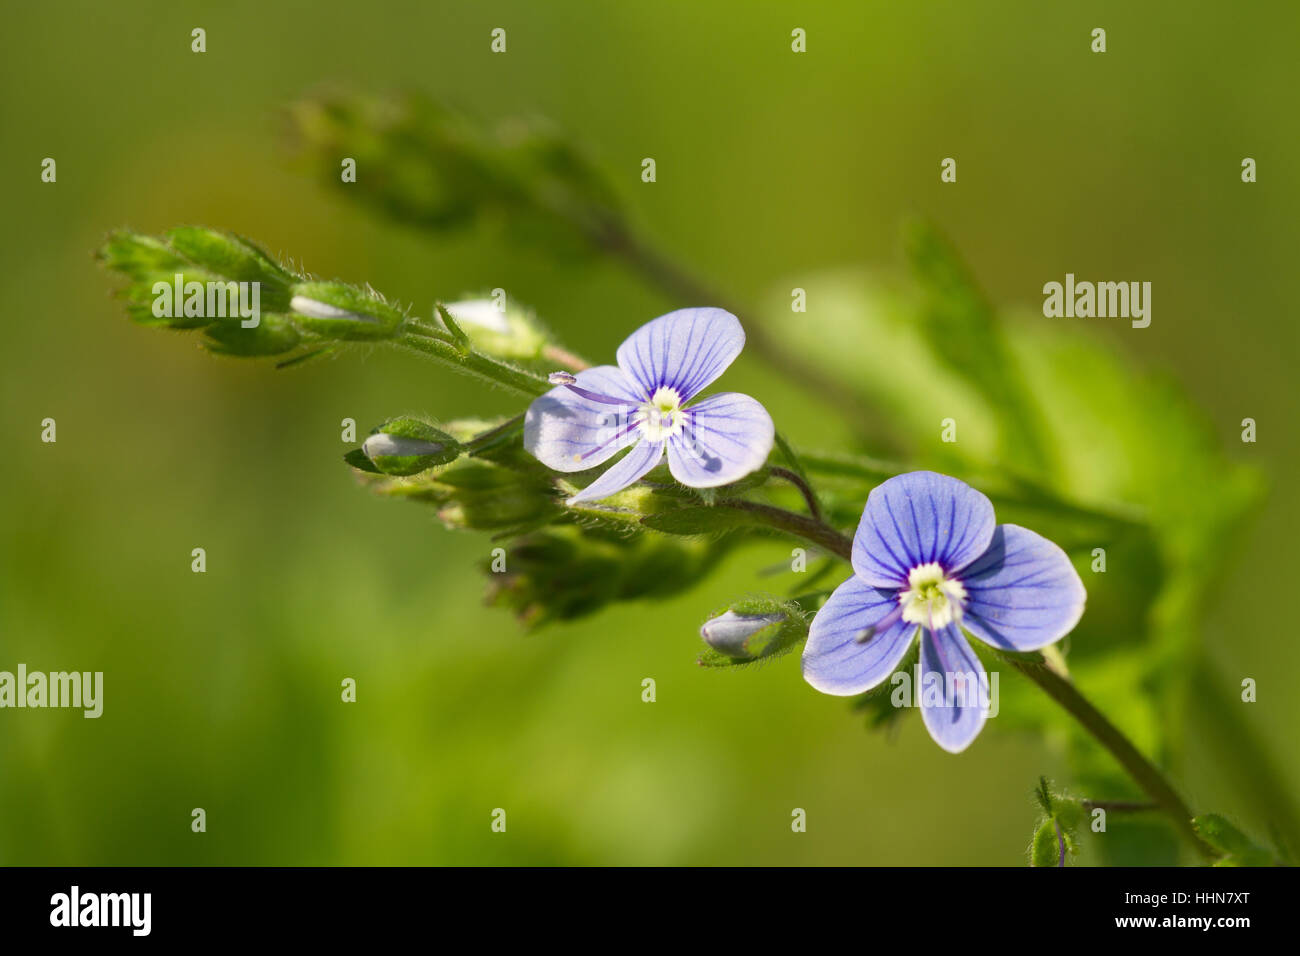 Beautiful floral background of spring flowers field veronica Stock Photo